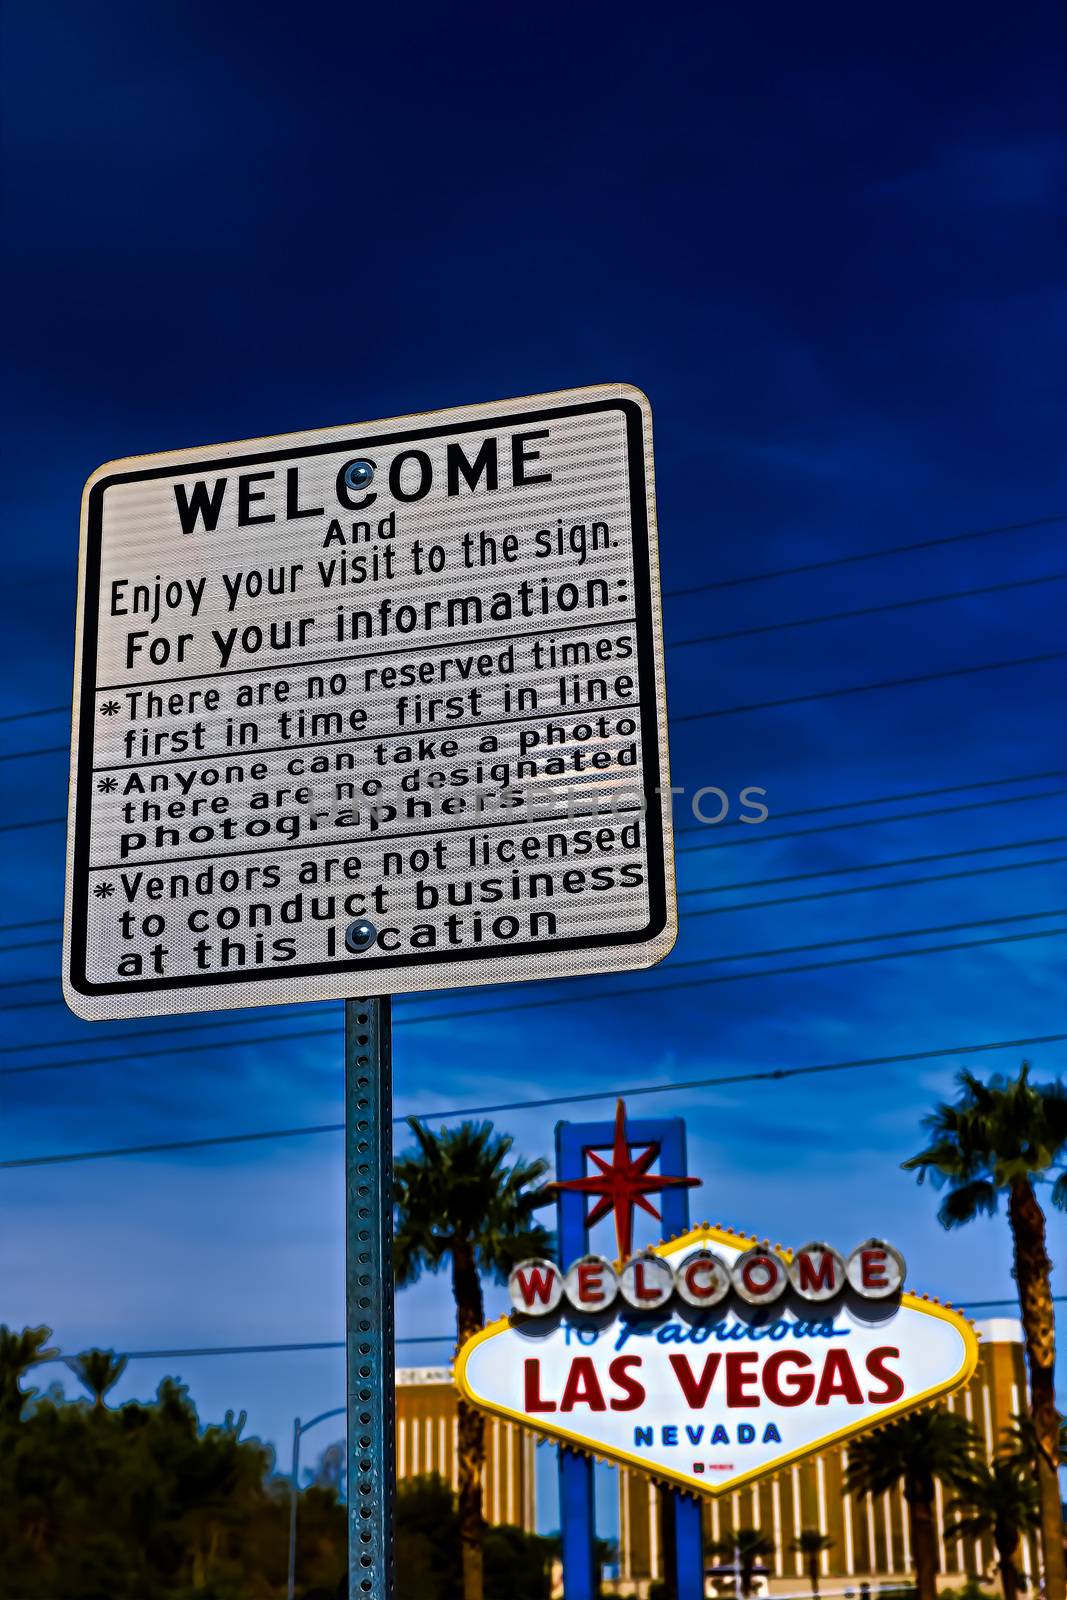 he Welcome to Fabulous Las Vegas sign on bright sunny day in Las Vegas.Welcome to Never Sleep city Las Vegas, Nevada Sign with the heart of Las Vegas scene in the background. by USA-TARO